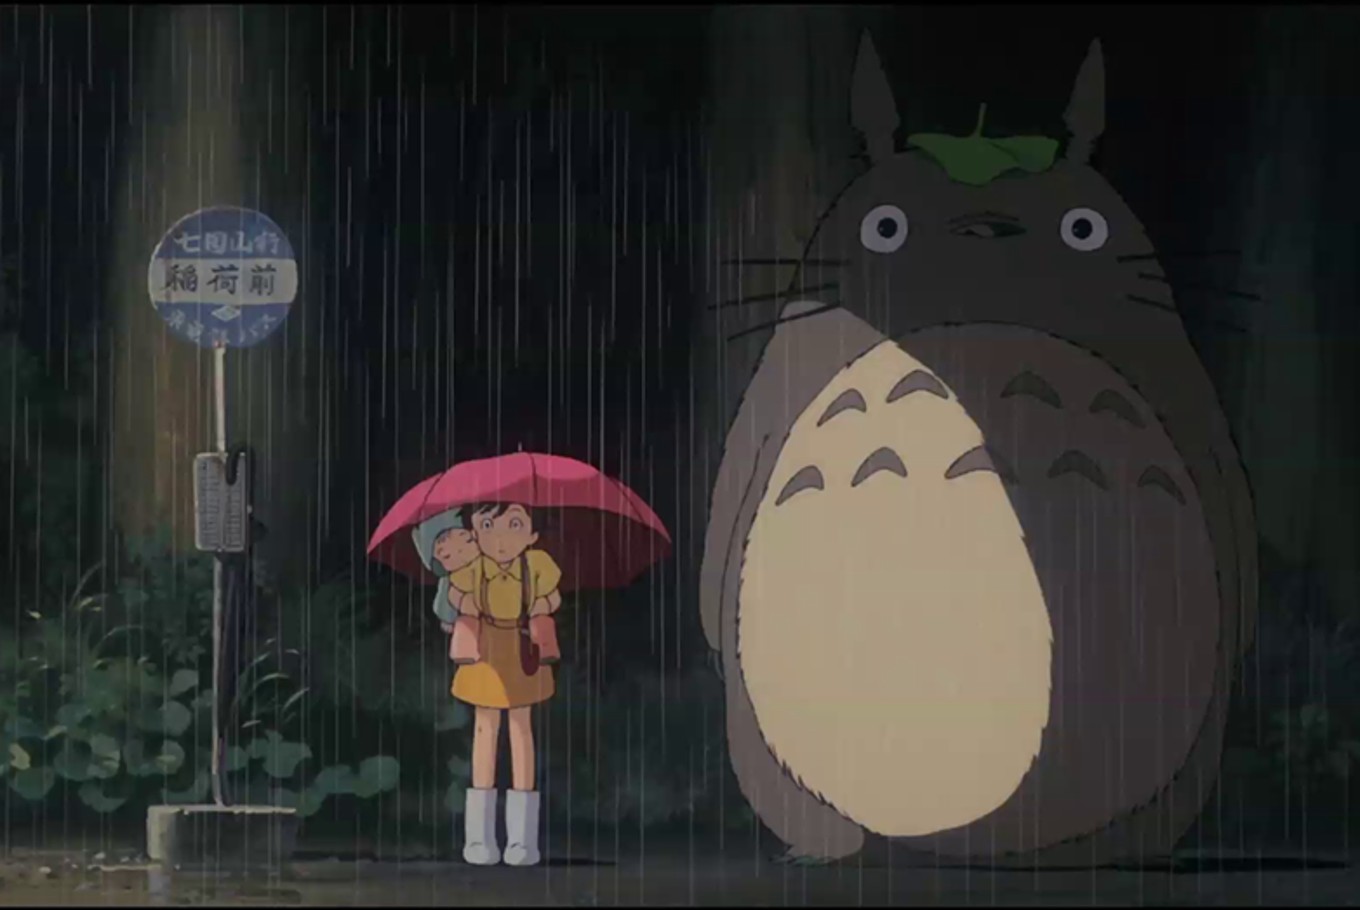 Check Out Fan Favorite Moments in My Neighbor Totoro